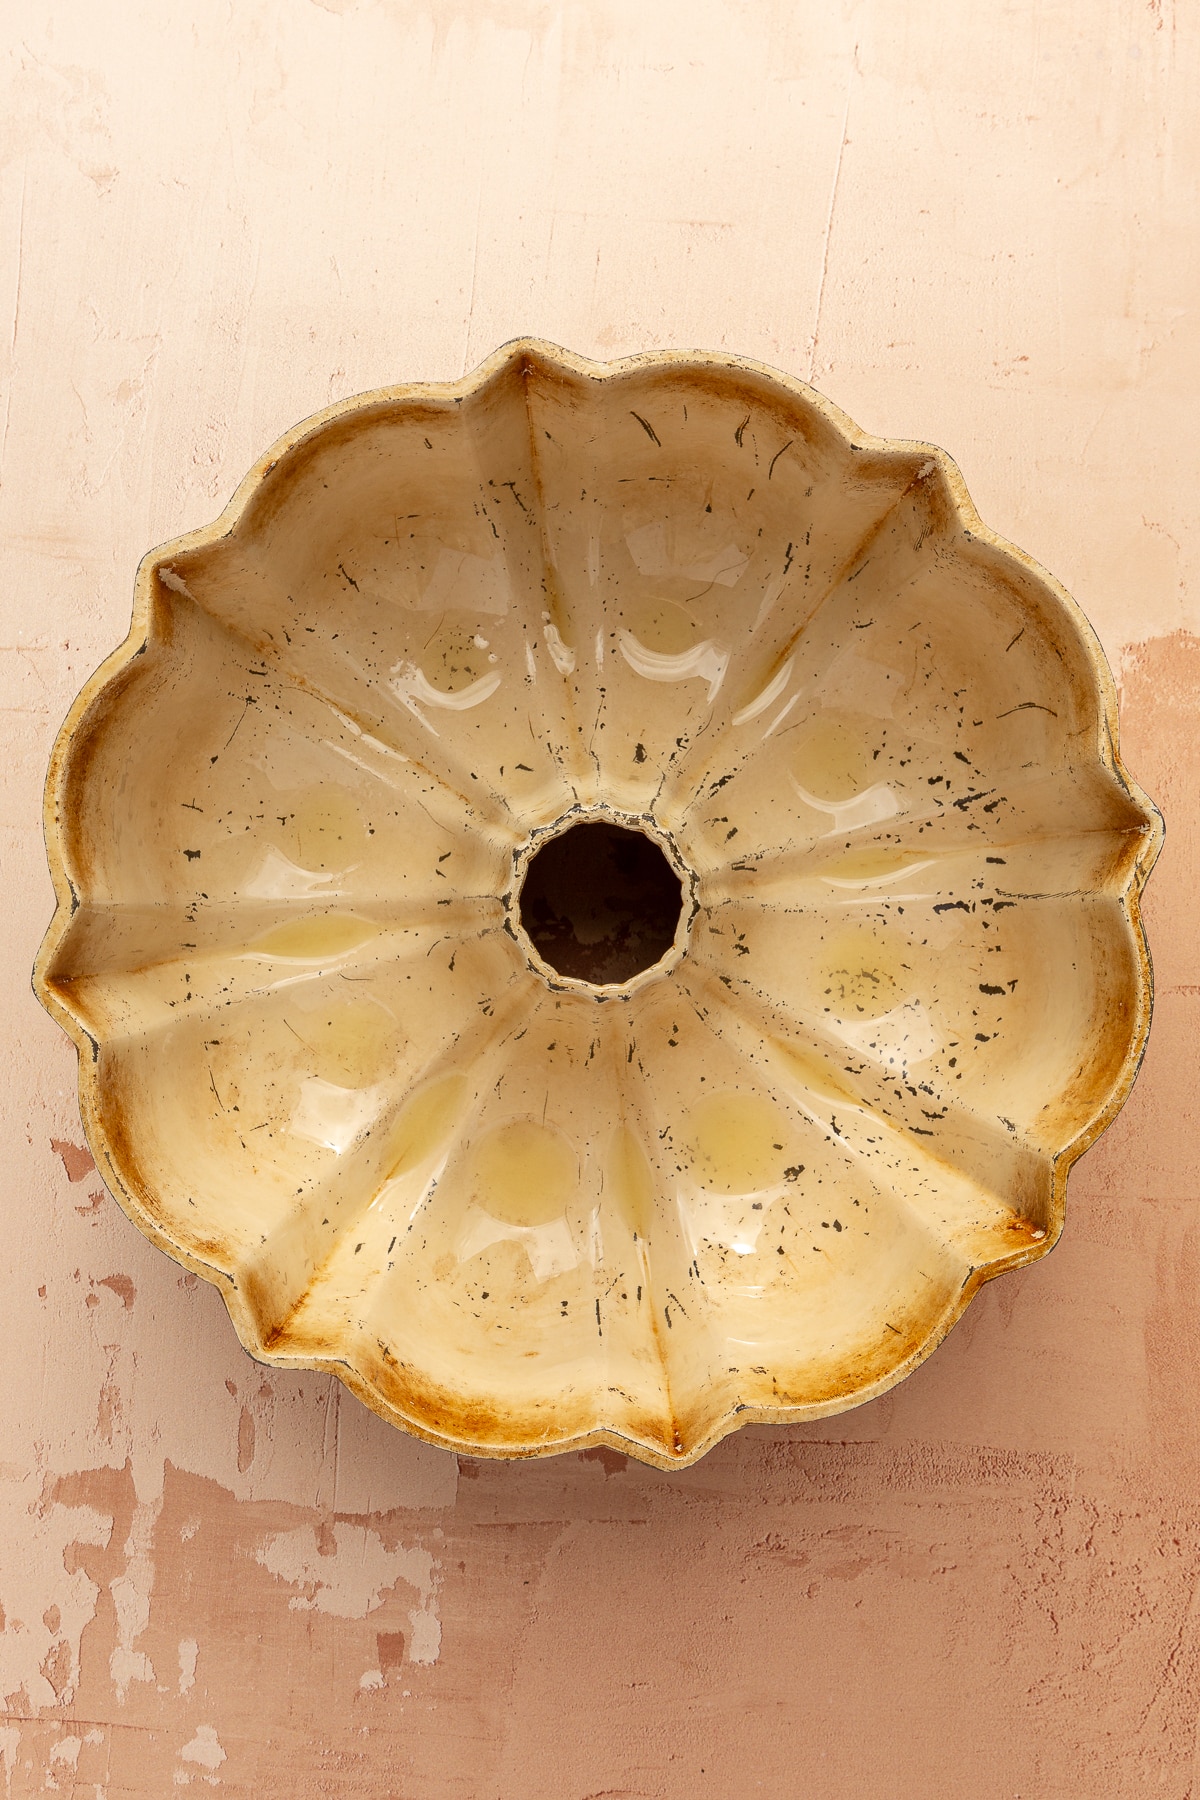 An off white/light yellow bundt cake pan coated with oil.